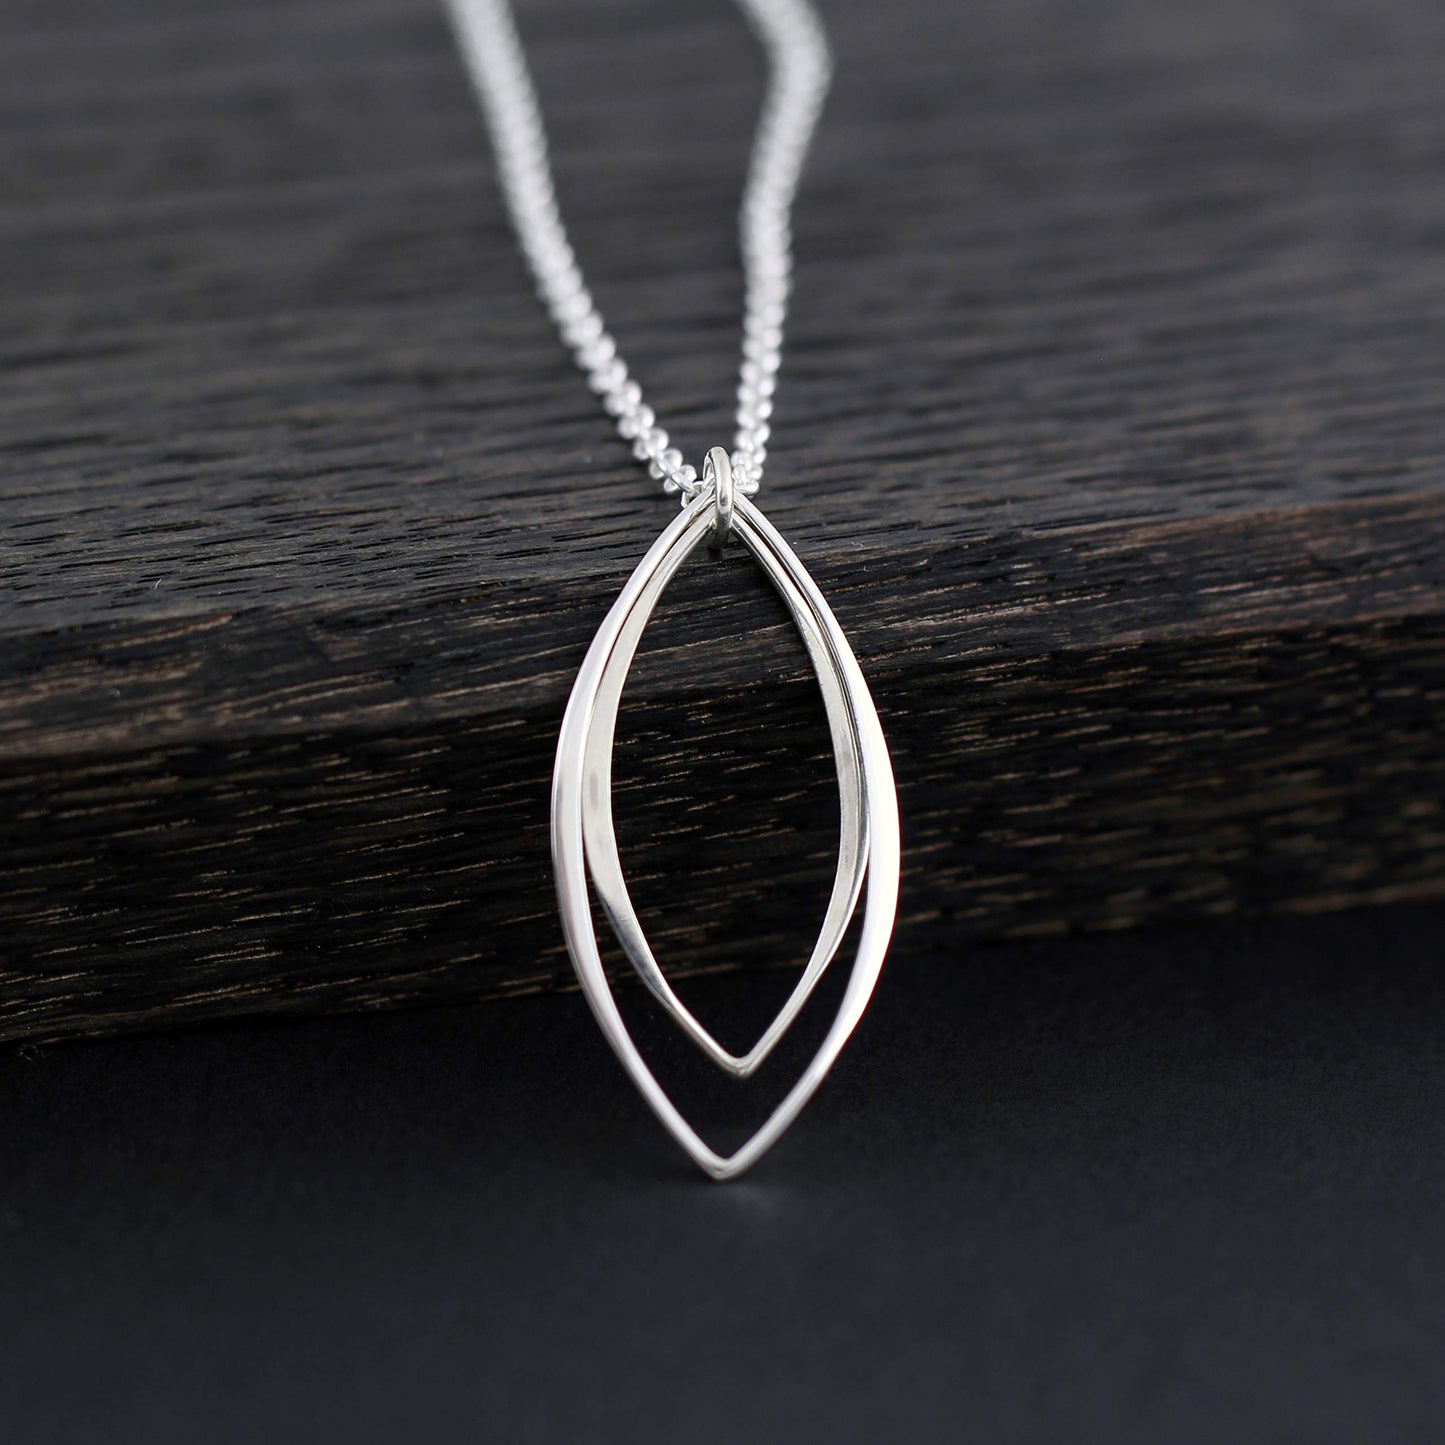 Sterling Silver Marquise Necklace • Modern Minimalist Jewelry • Simple Delicate Pendant • Handmade Necklace • Necklaces for Women • Gifts for Teen Teenage Girl Gift • Geometric Shape • Sexy Edgy